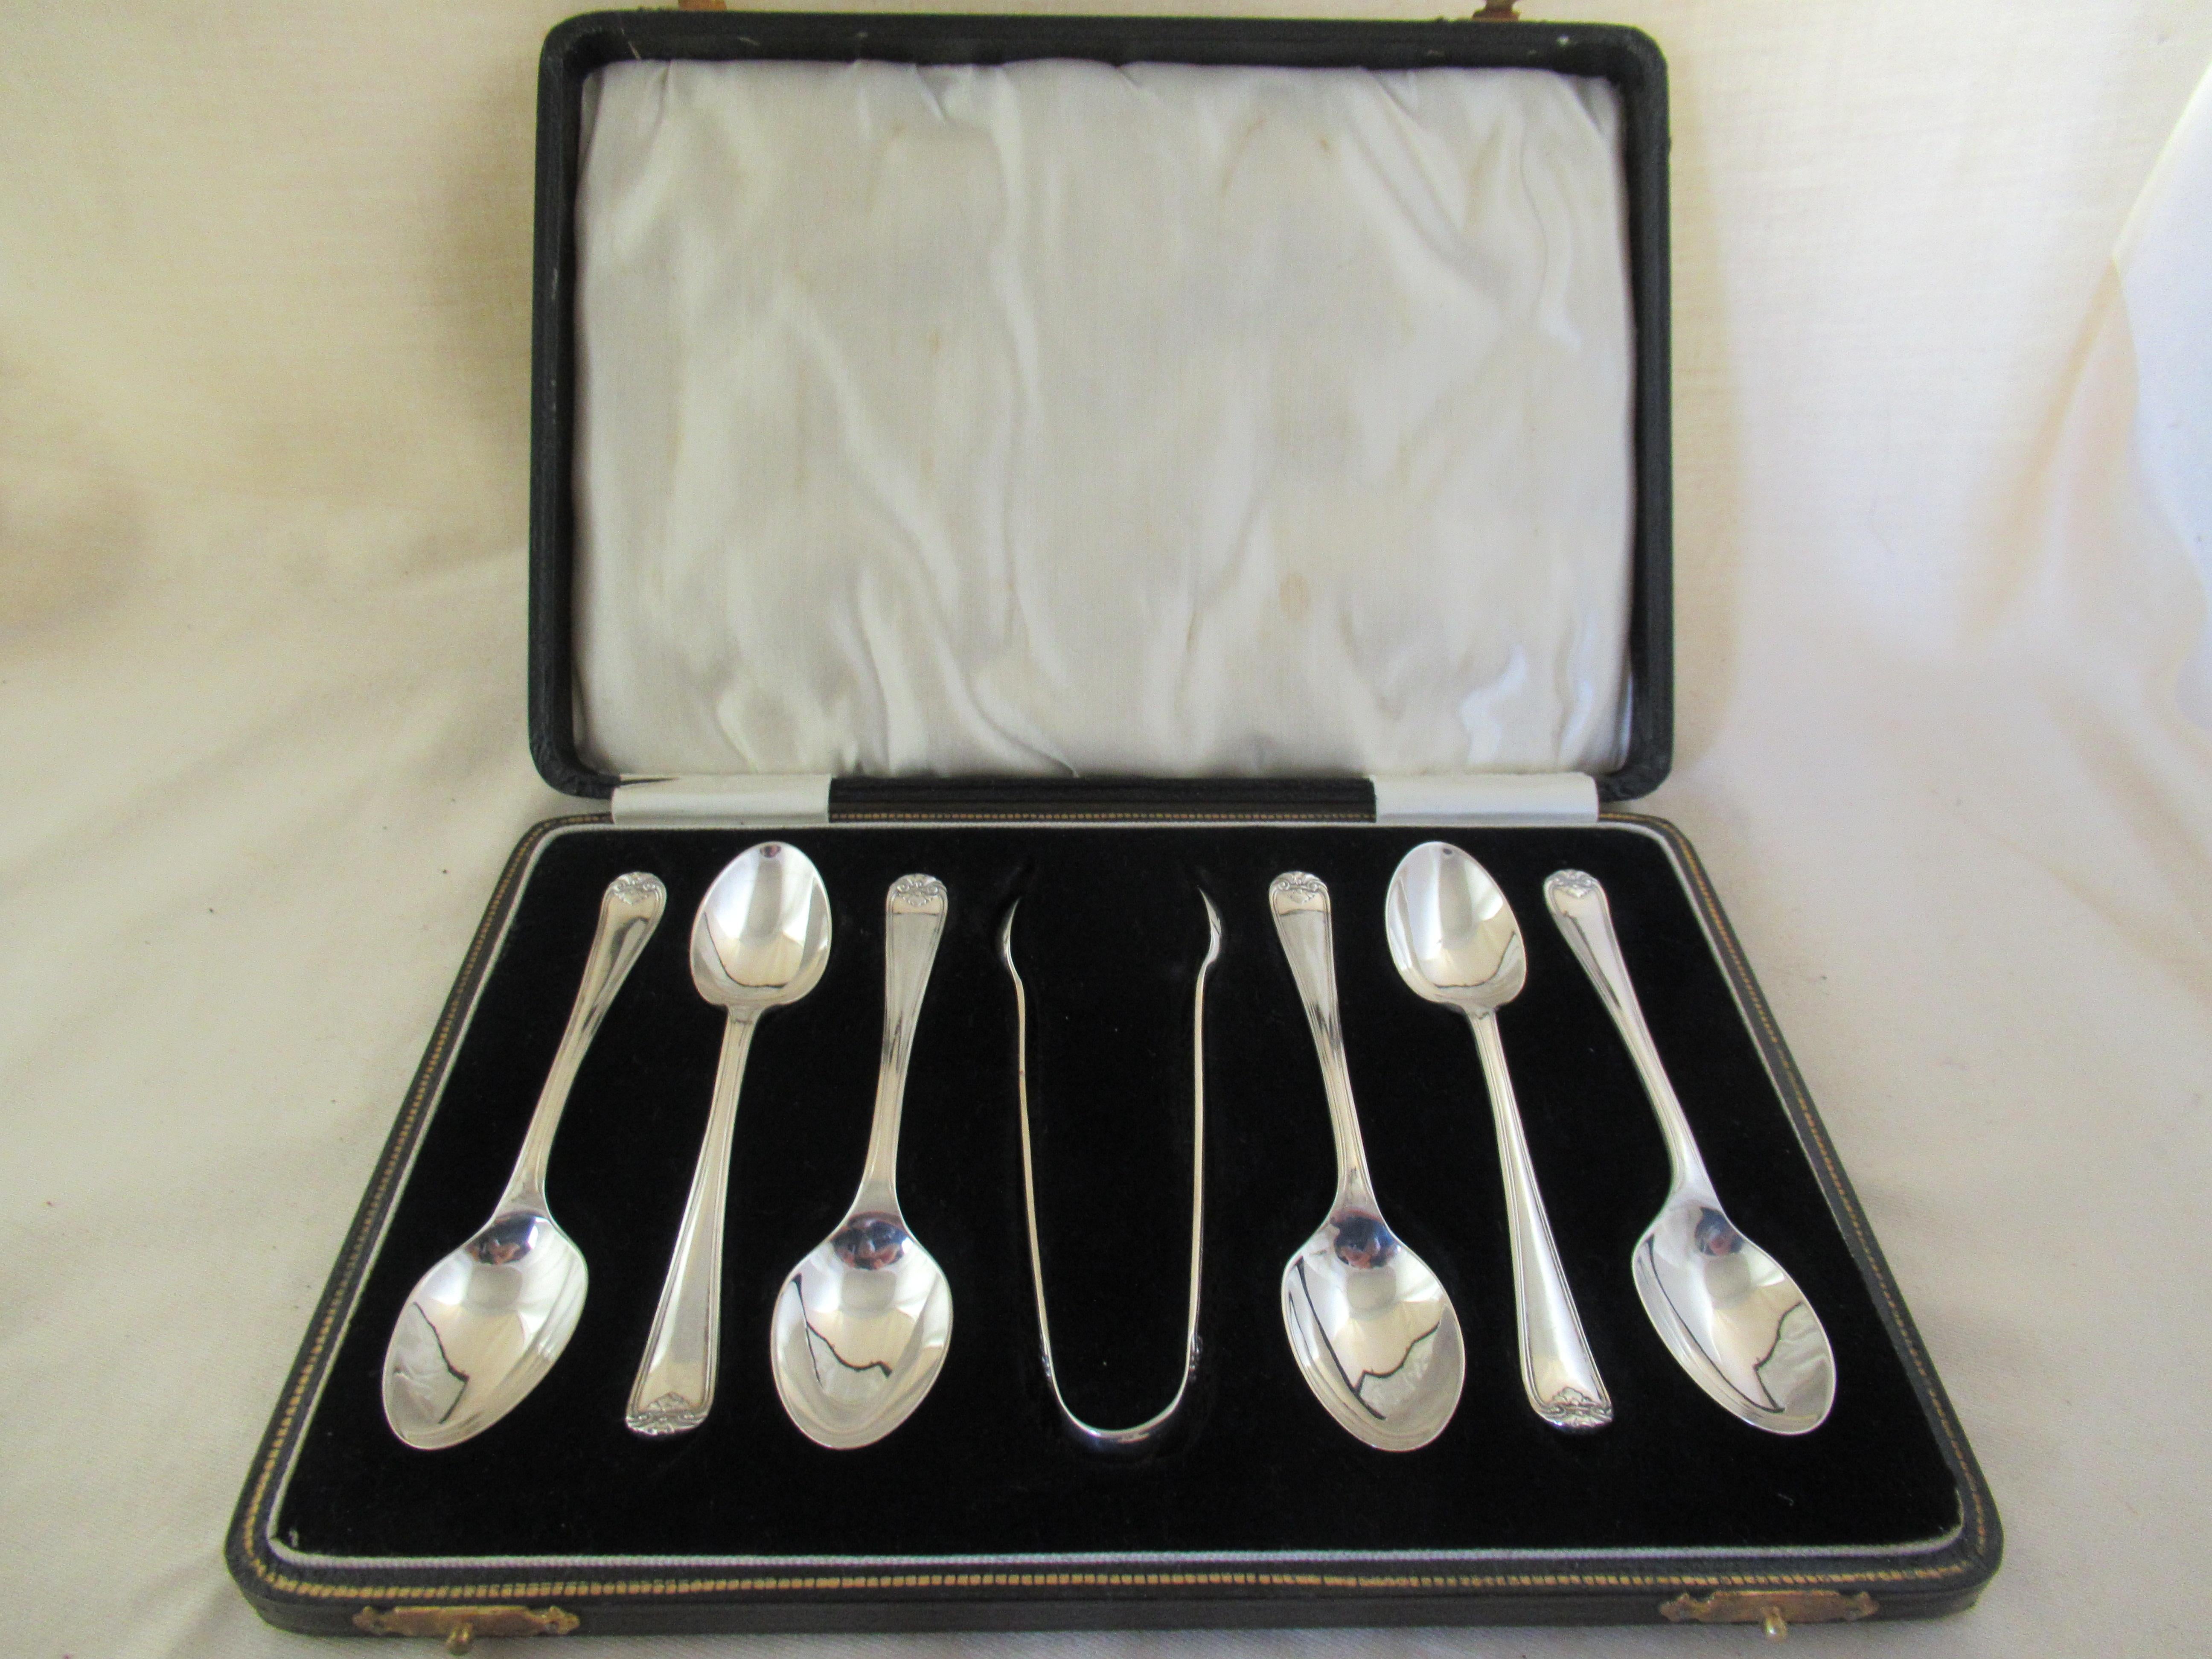 Solid Sterling Silver - BOX of 6 PRETTY TEASPOONS & TONGS
Complete English hallmarks showing they were made in Sheffield in 1924.
Hallmarks applied by the Sheffield Assay Office:-
 Crown - Sheffield Assay Office
 Lion - Sterling guarantee mark
